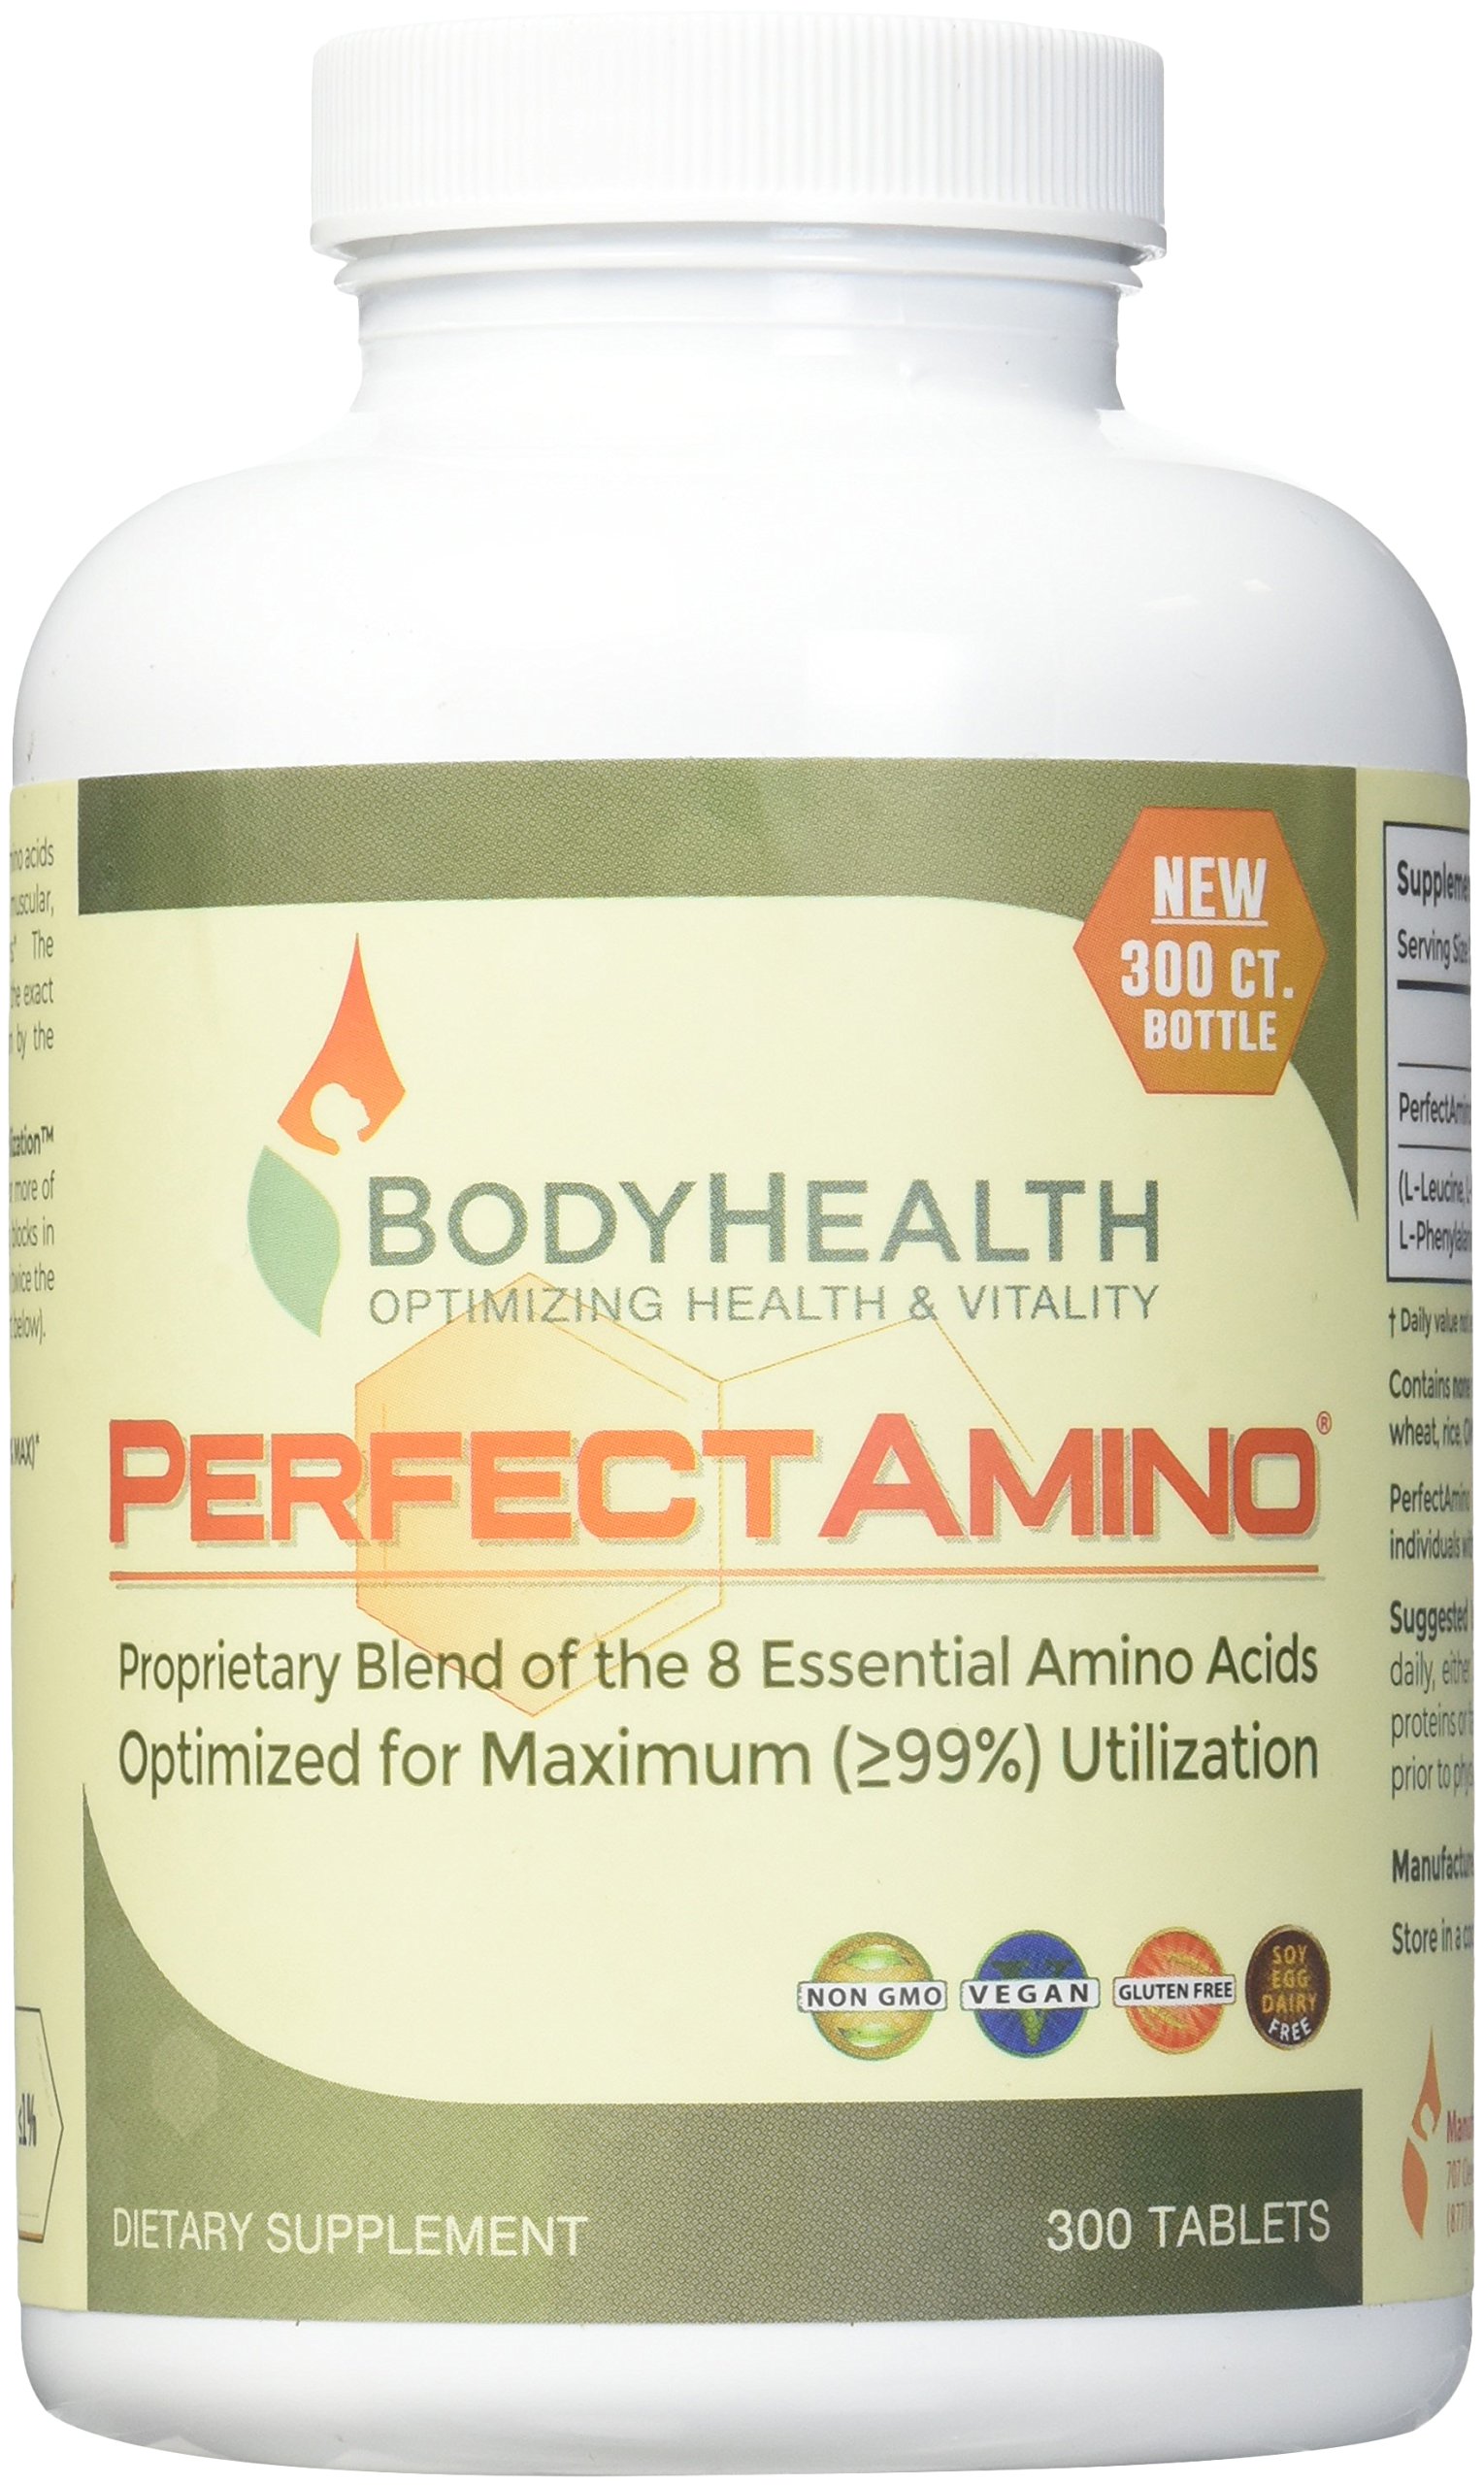 Perfect Amino (300 Tablets) 8 Essential Amino Acid Tablets with BCAA by BodyHealth, Vegan Branched Chain Protein Pre/Post Workout, Increase Lean Muscle Mass, Boost Energy & Stamina, 99% Utilization - image 1 of 3